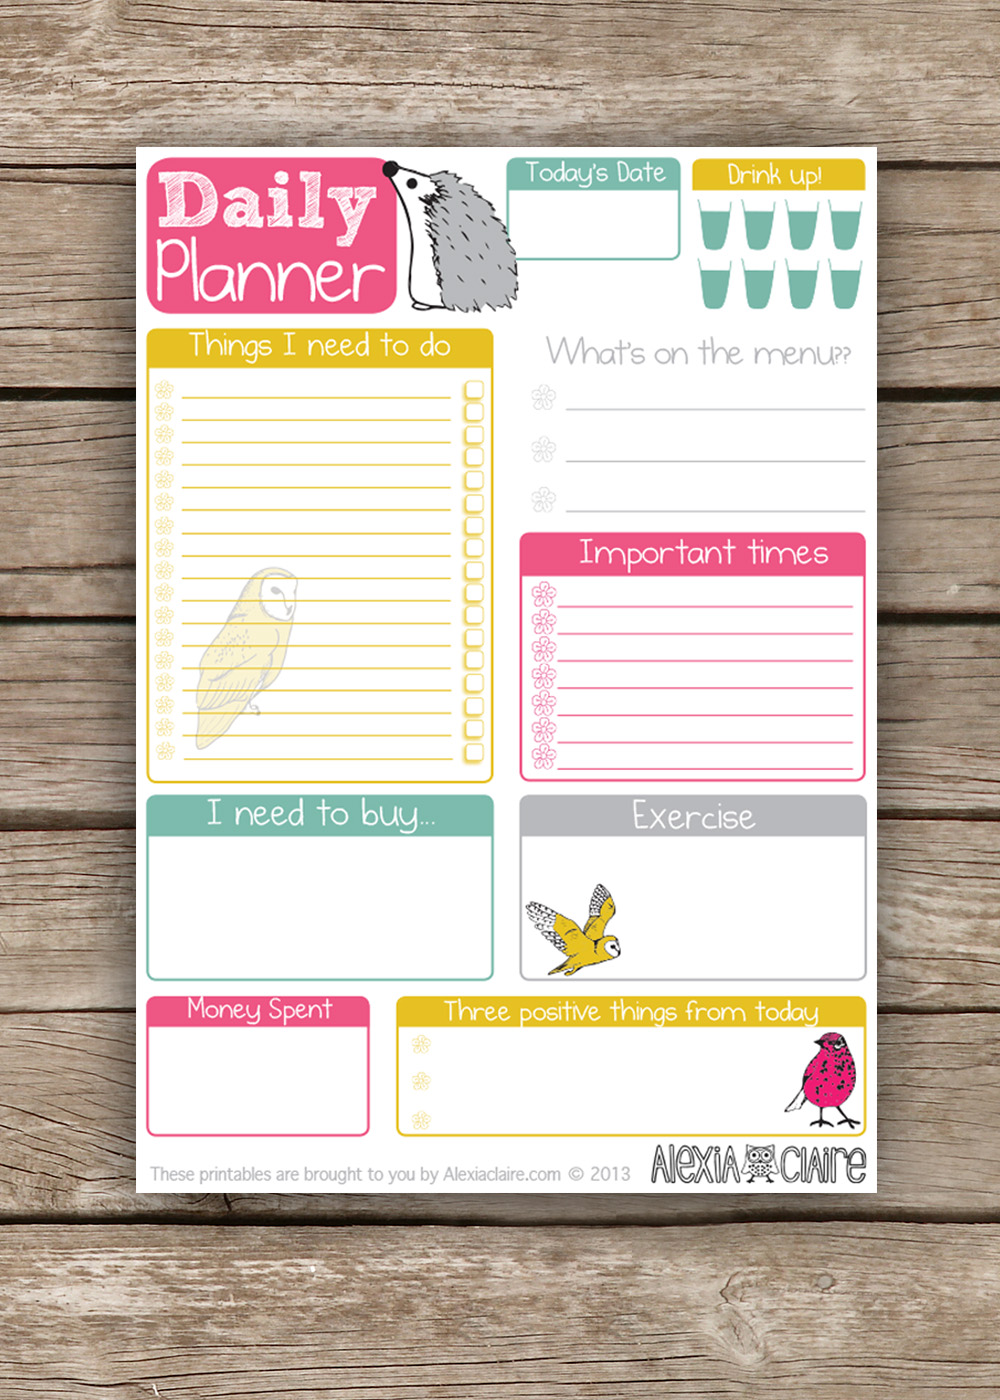 7-best-images-of-printable-daily-planner-to-do-list-template